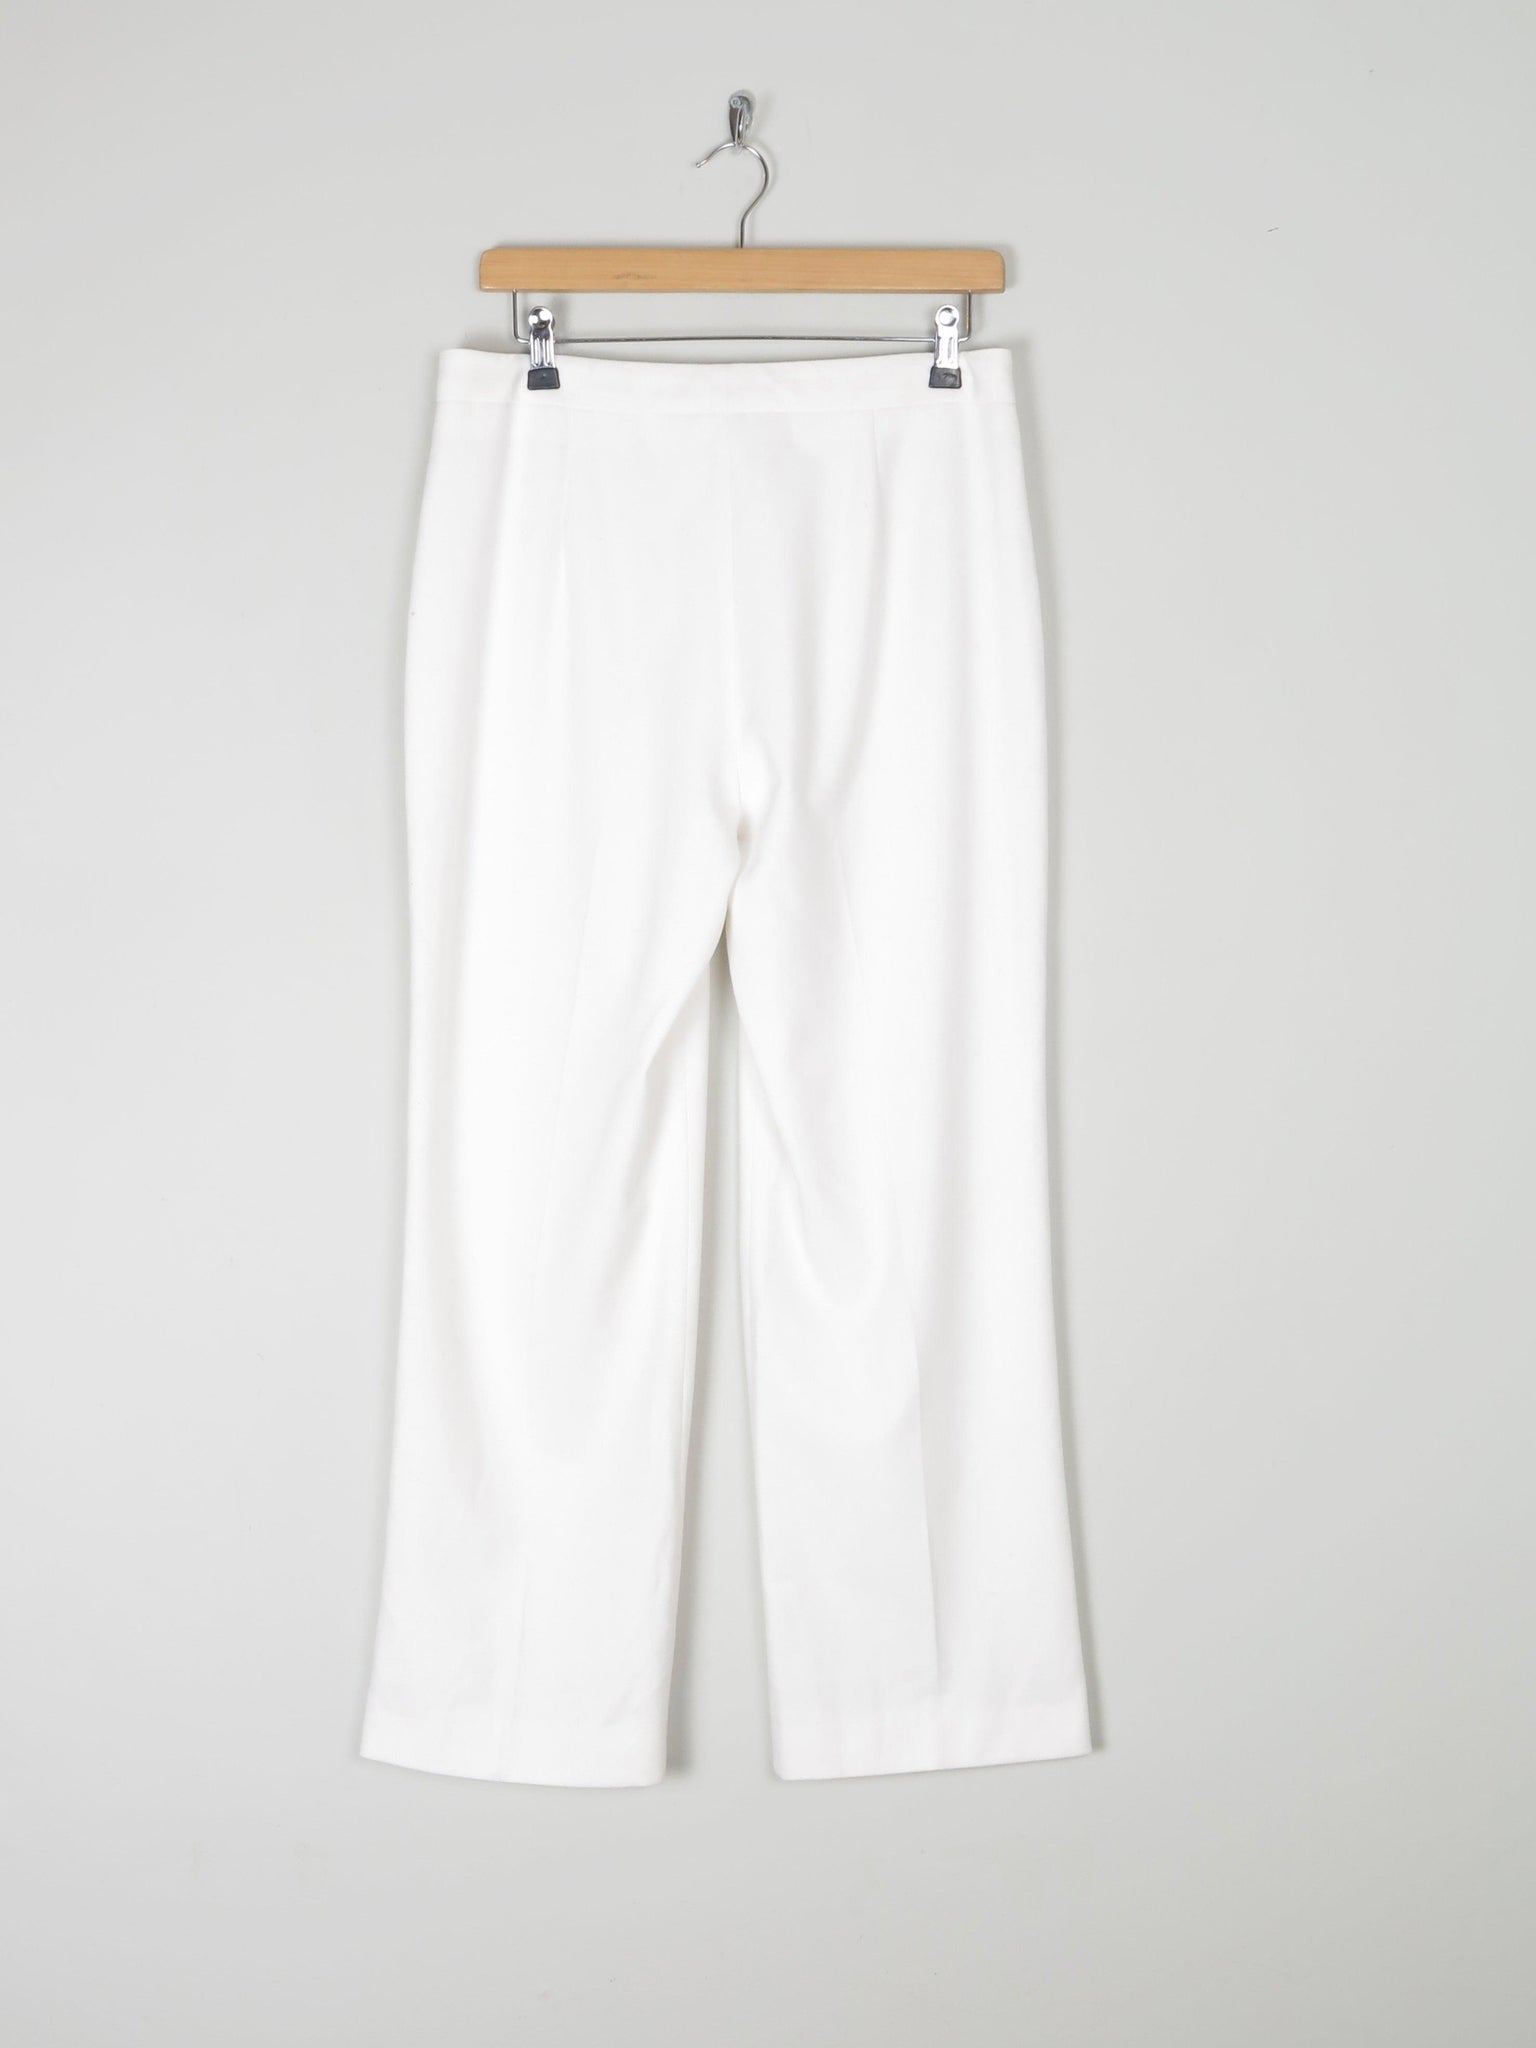 Women's Ivory High Waisted Tailored Trousers 12/30 L - The Harlequin